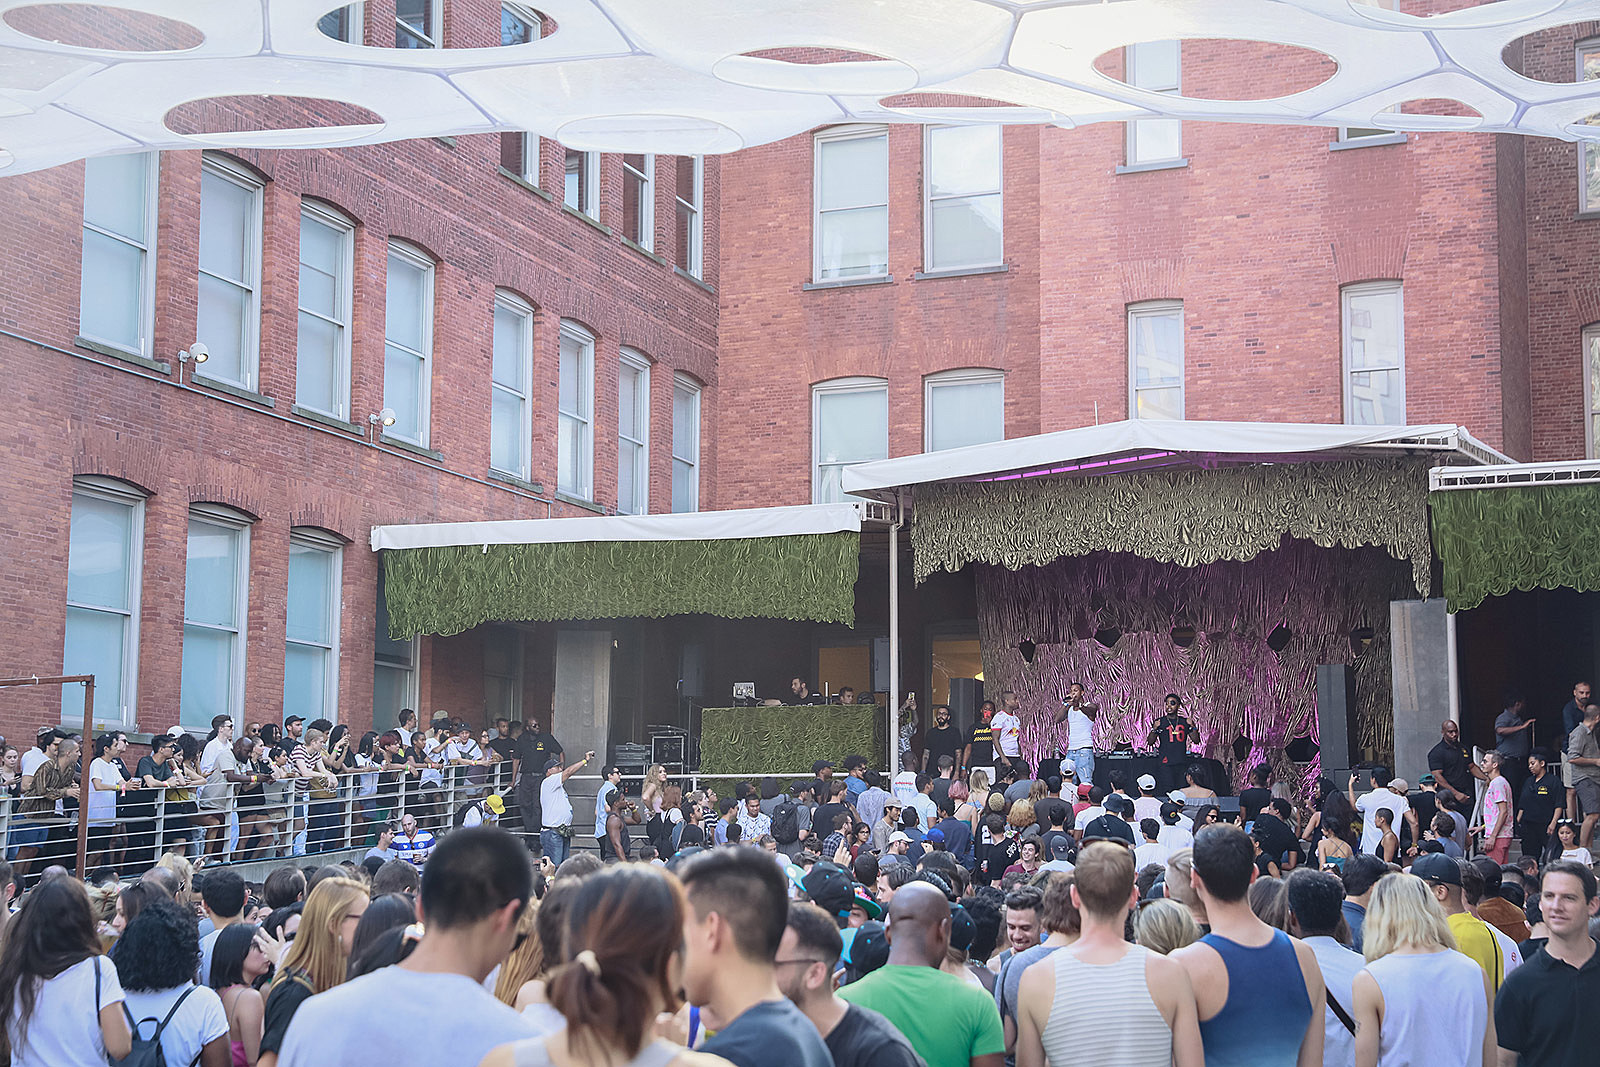 MoMA PS1's Warm Up 2017